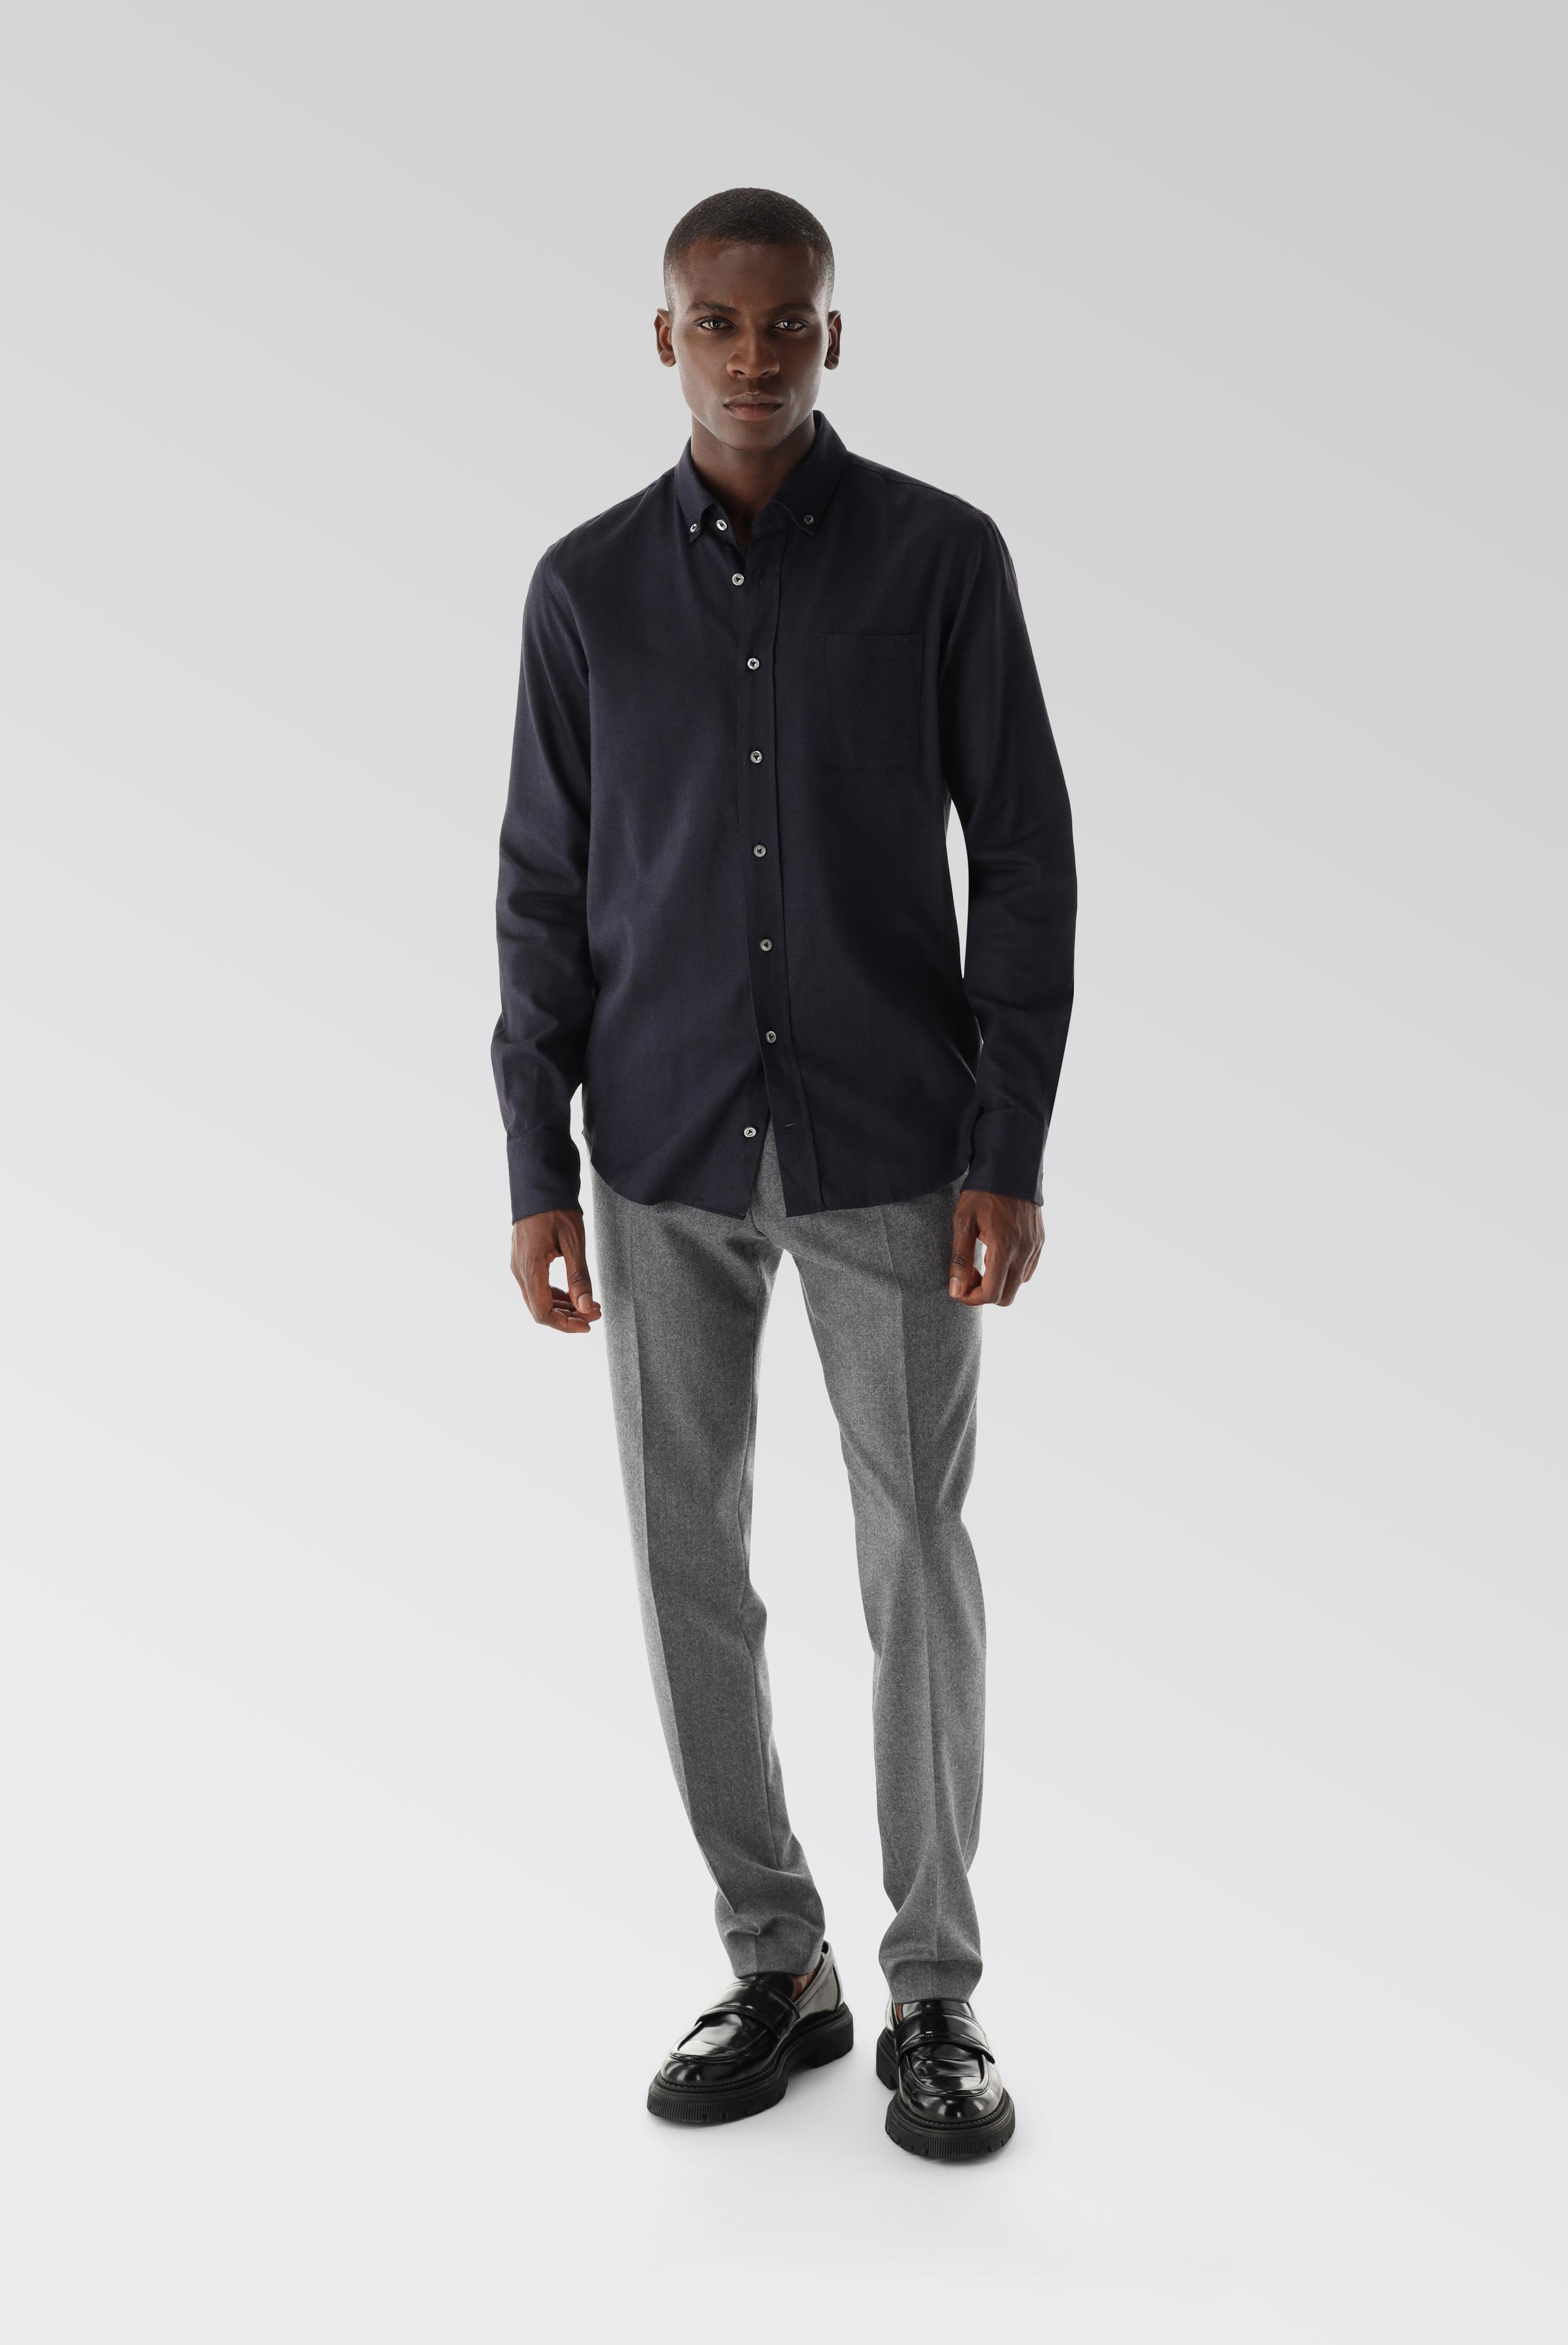 Casual Hemden+Button-Down Flanellhemd Tailor Fit+20.2013.9V.155045.790.43